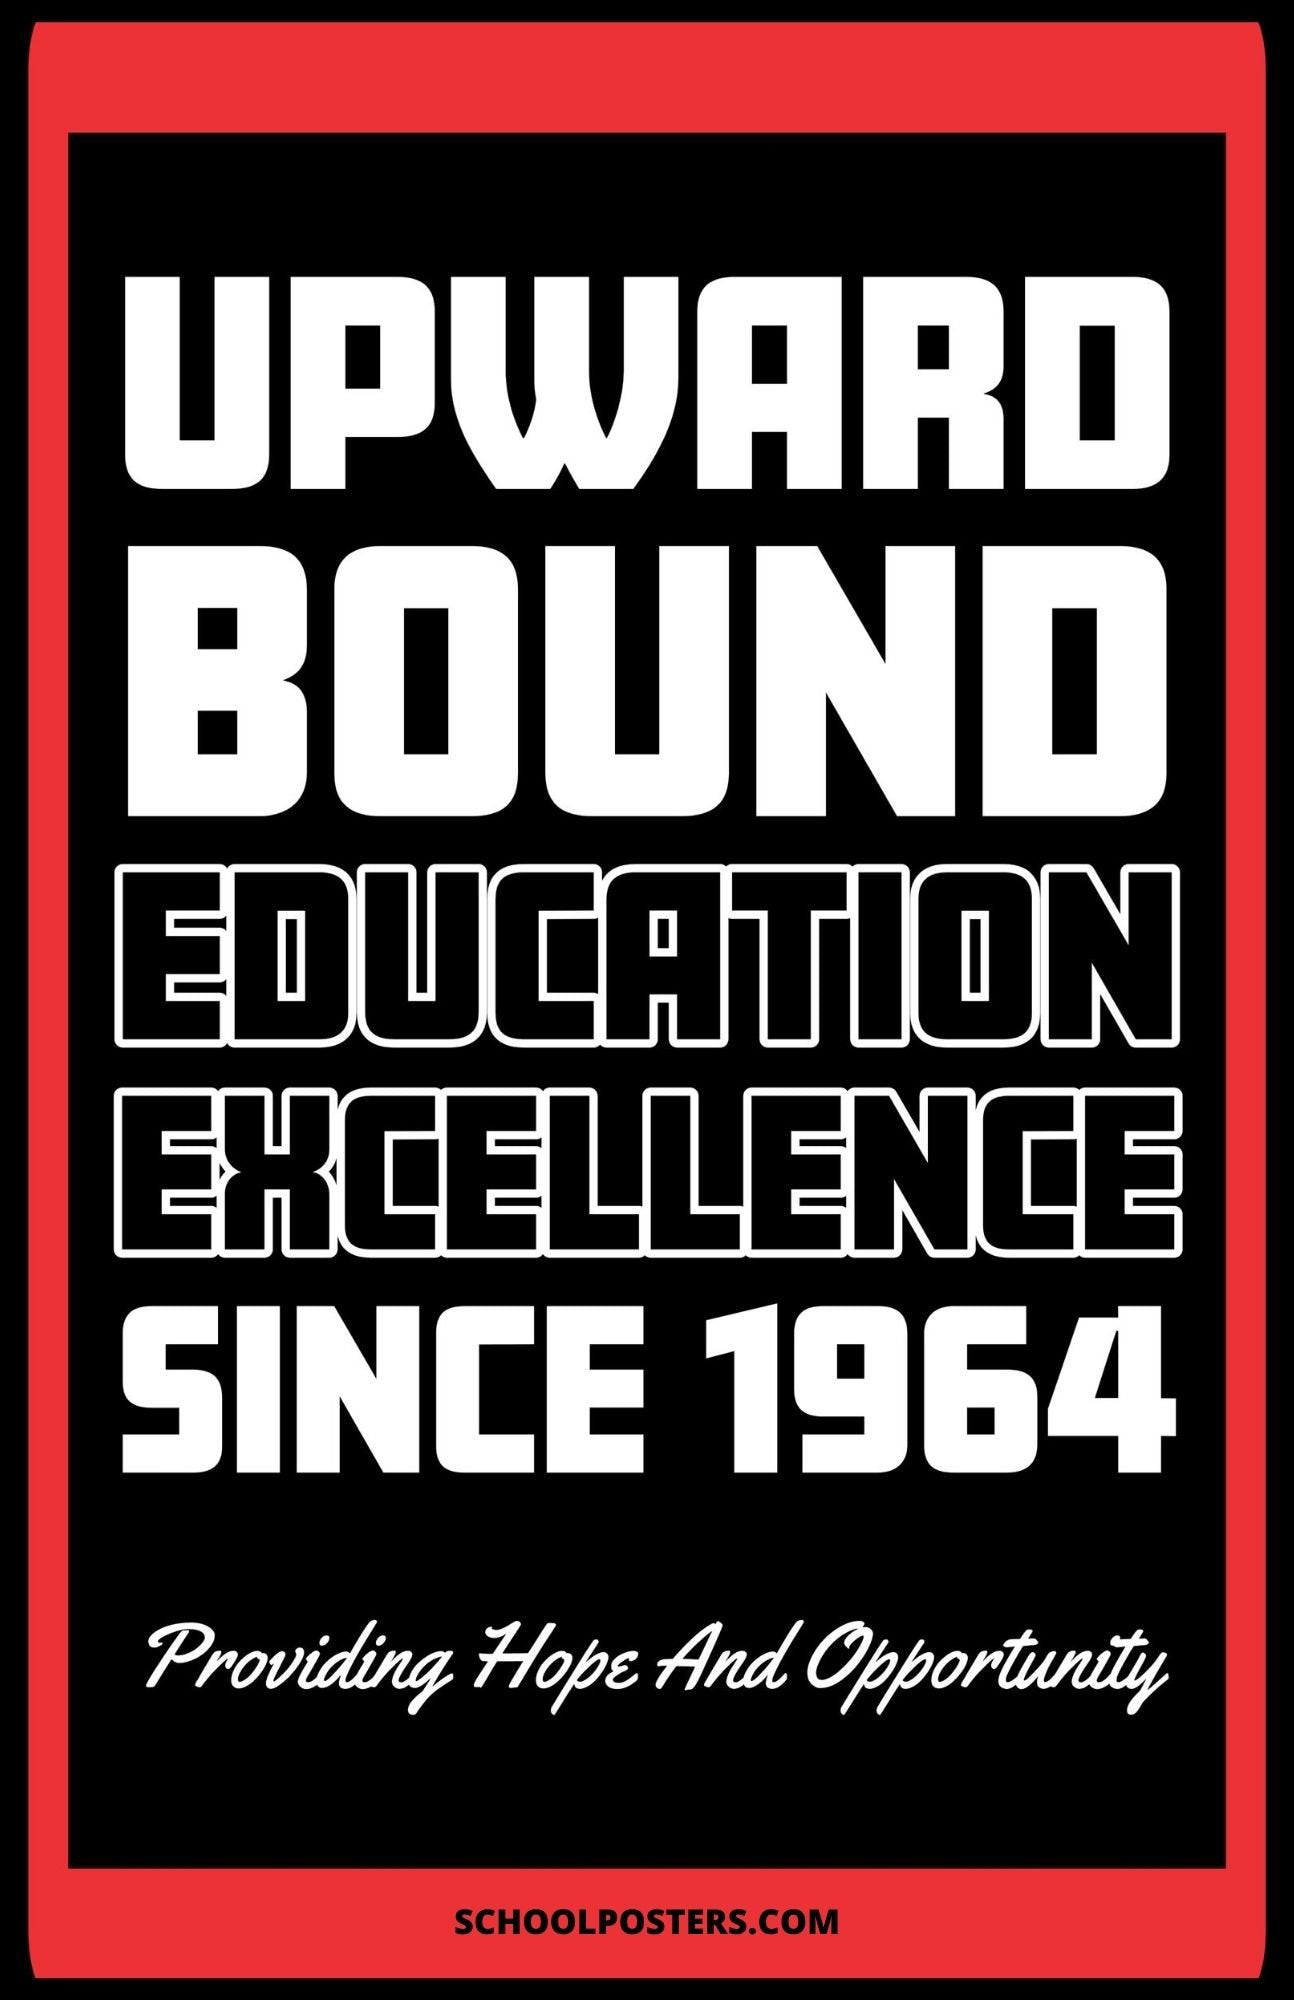 TRIO Upward Bound Education Excellence Poster